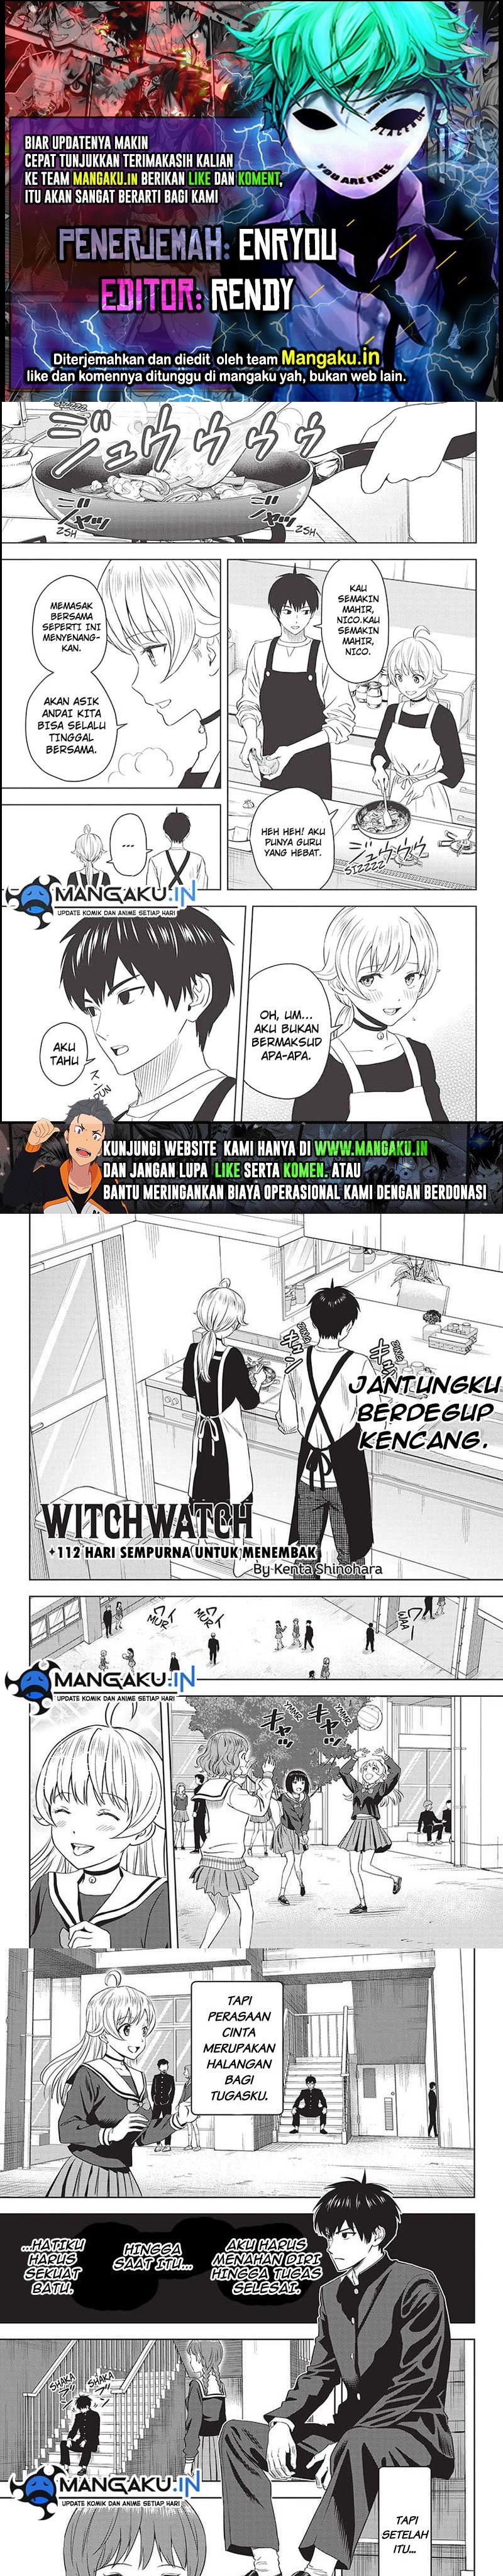 Witch Watch Chapter 112